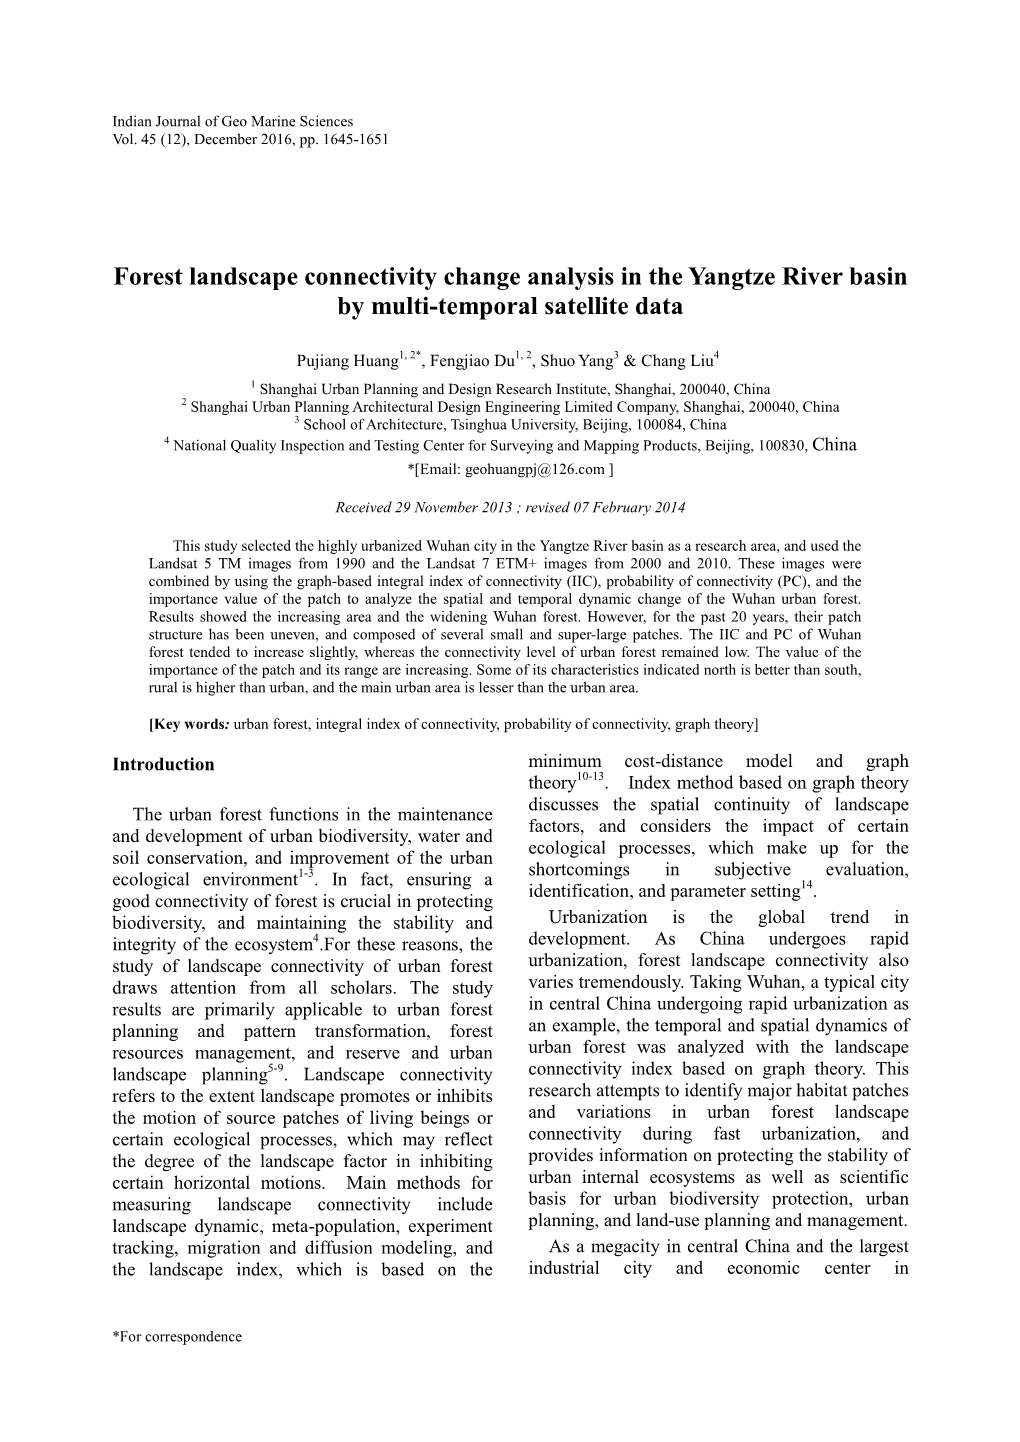 Forest Landscape Connectivity Change Analysis in the Yangtze River Basin by Multi-Temporal Satellite Data